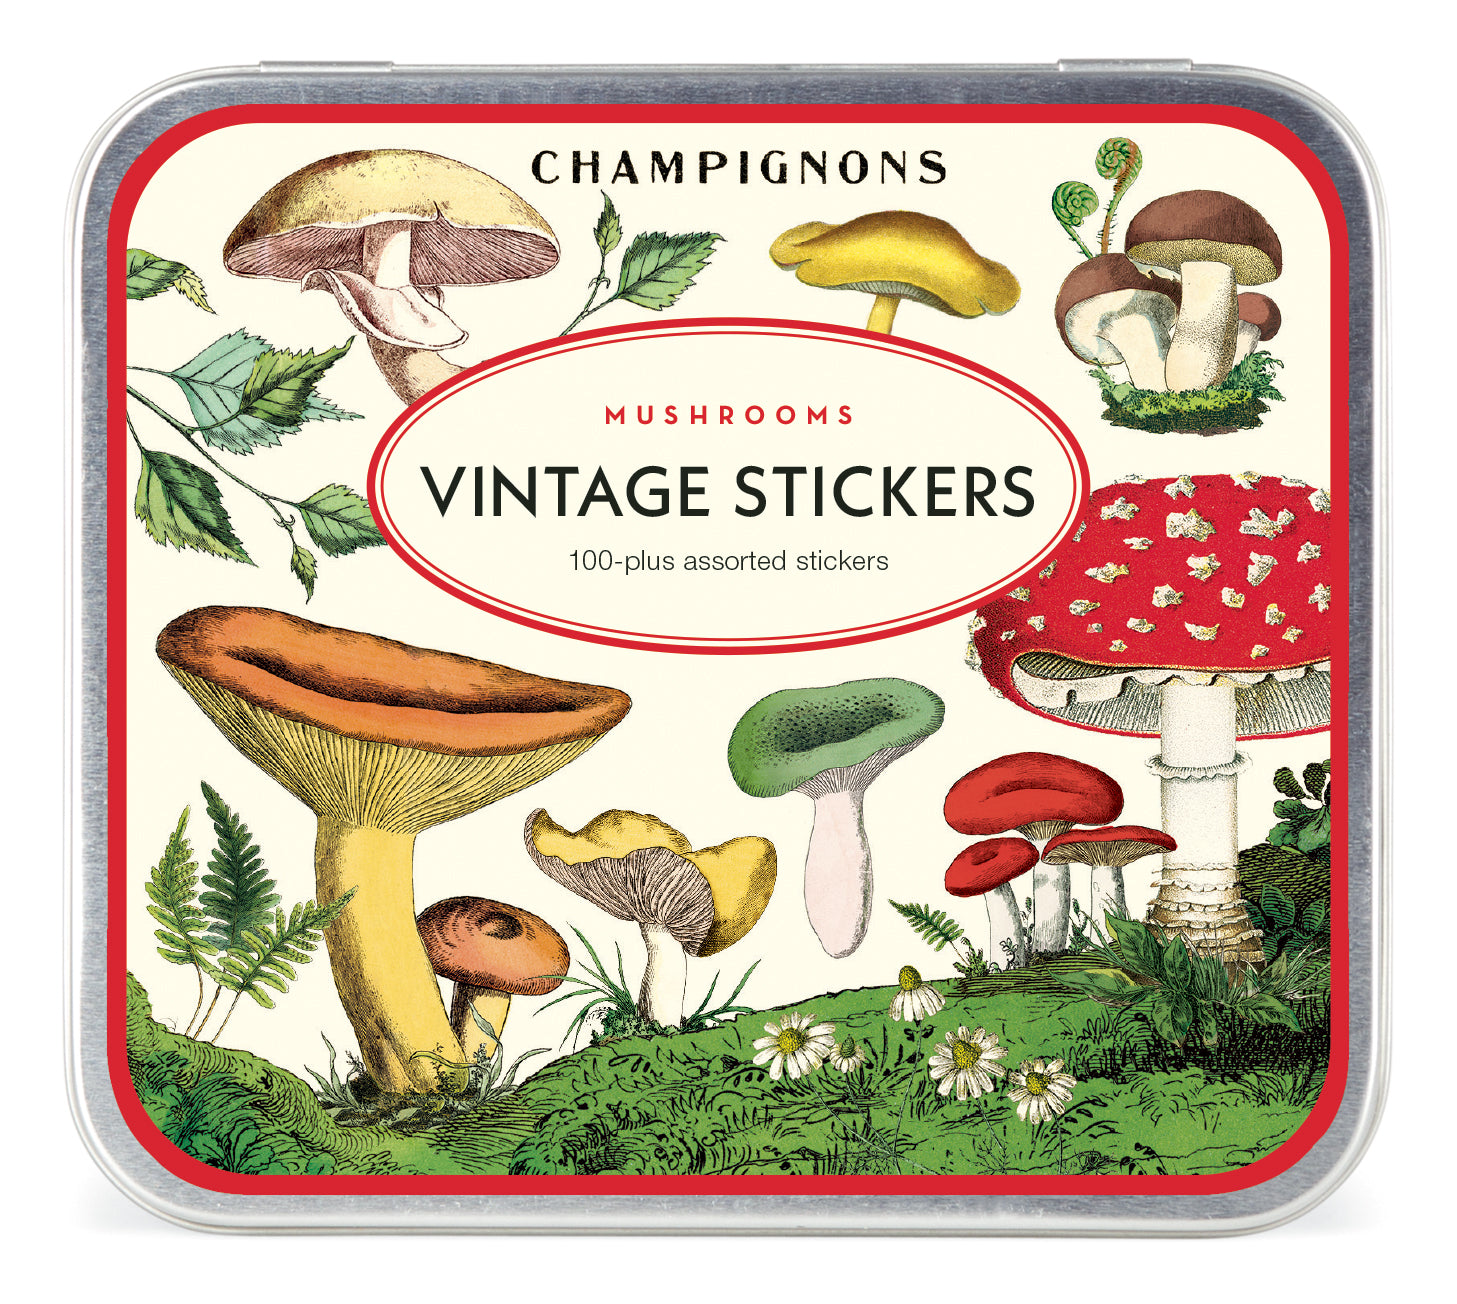 Mushrooms 5.25&quot; x 4.75&quot; tin containing a curated collection of vintage-inspired stickers featuring images from the Cavallini archives.